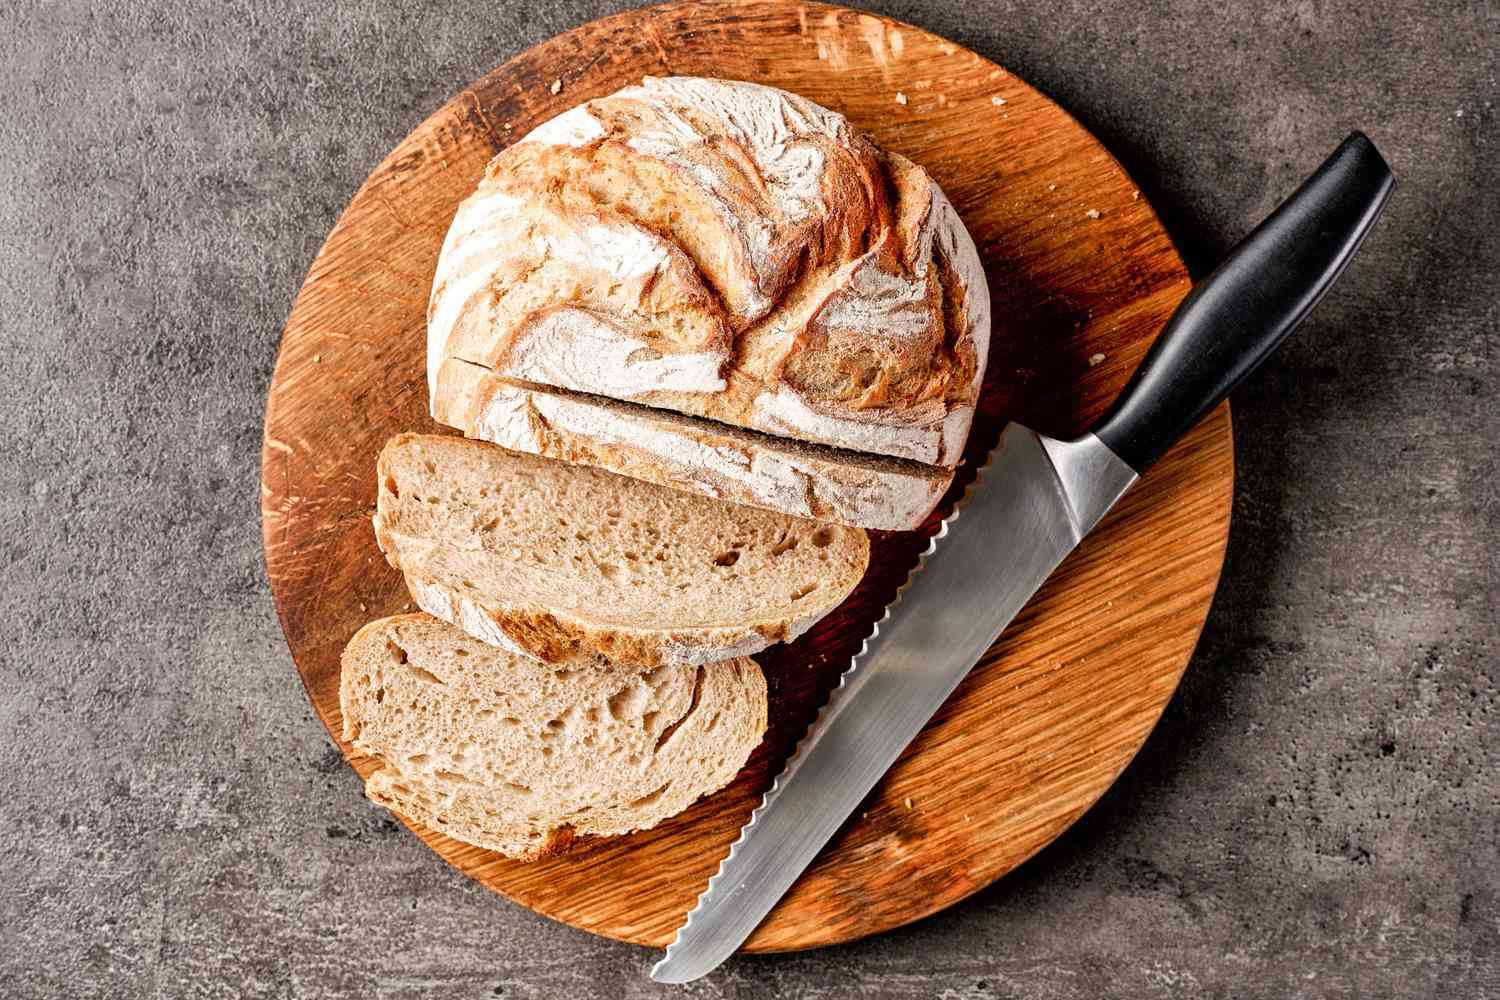 A Serrated Knife Is Essential for Slicing Bread and So Much More—Here's How to Keep It Sharp